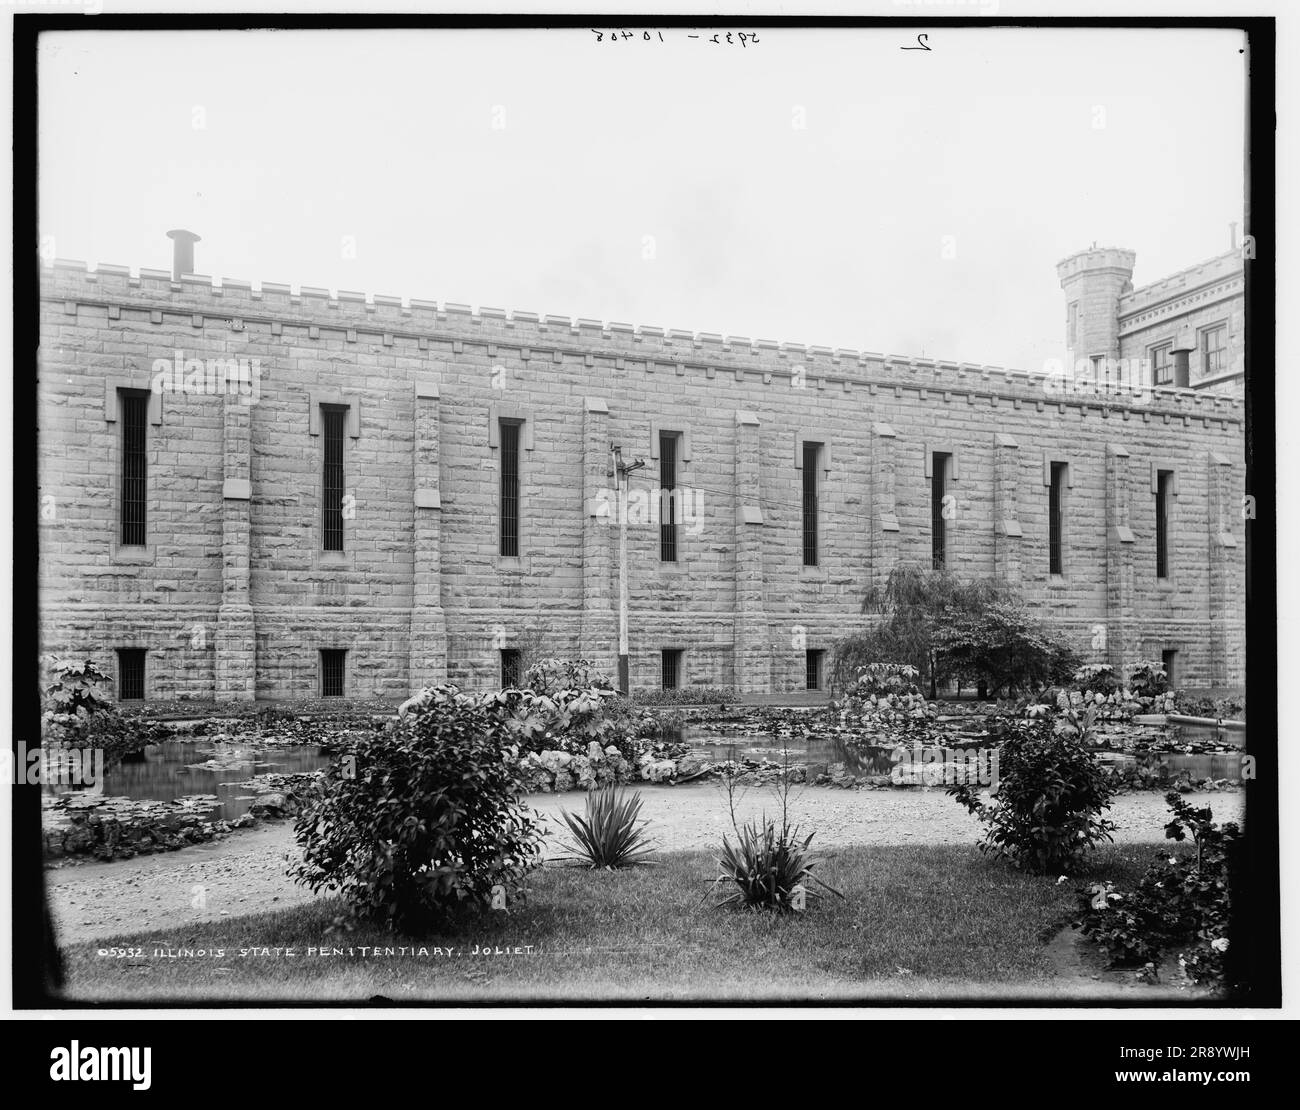 Illinois State Penitentiary, Joliet, between 1890 and 1901. Opened in 1858. Stock Photo